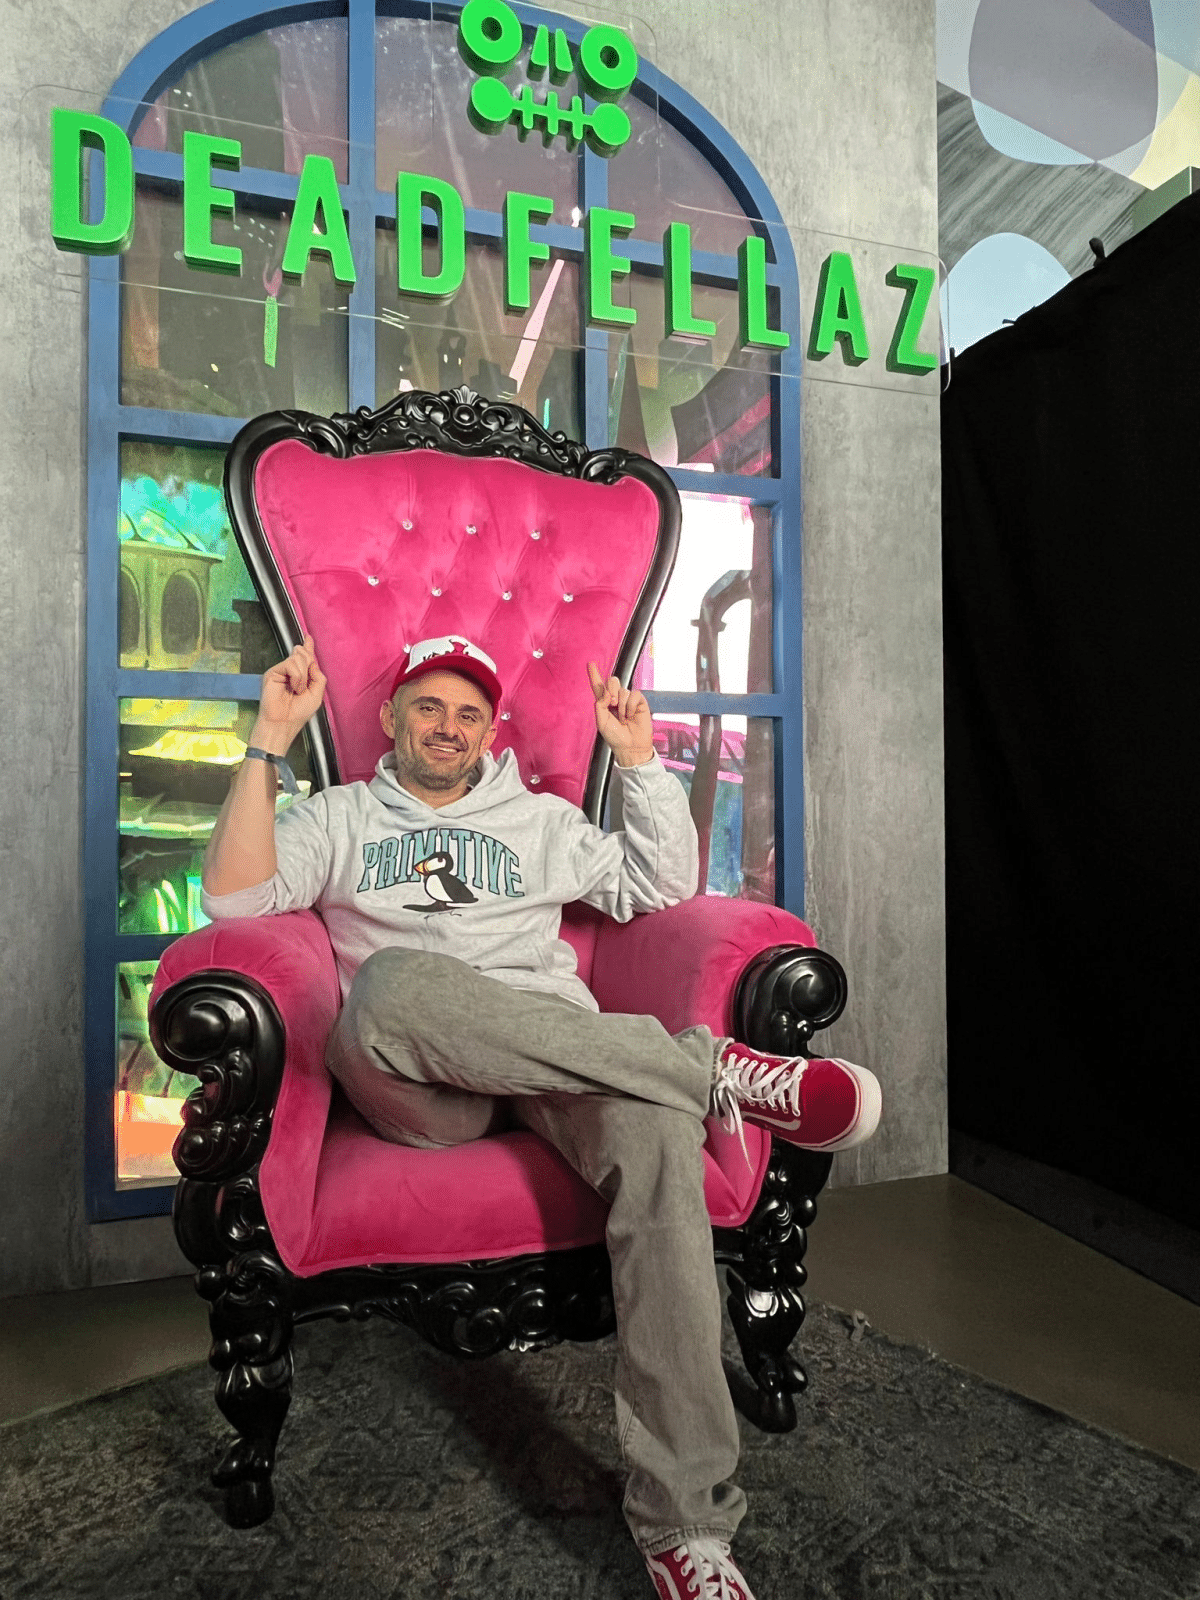 The picture shows Gary Vee sitting on a chair and pointing to a sign above his head that says DeadFellaz